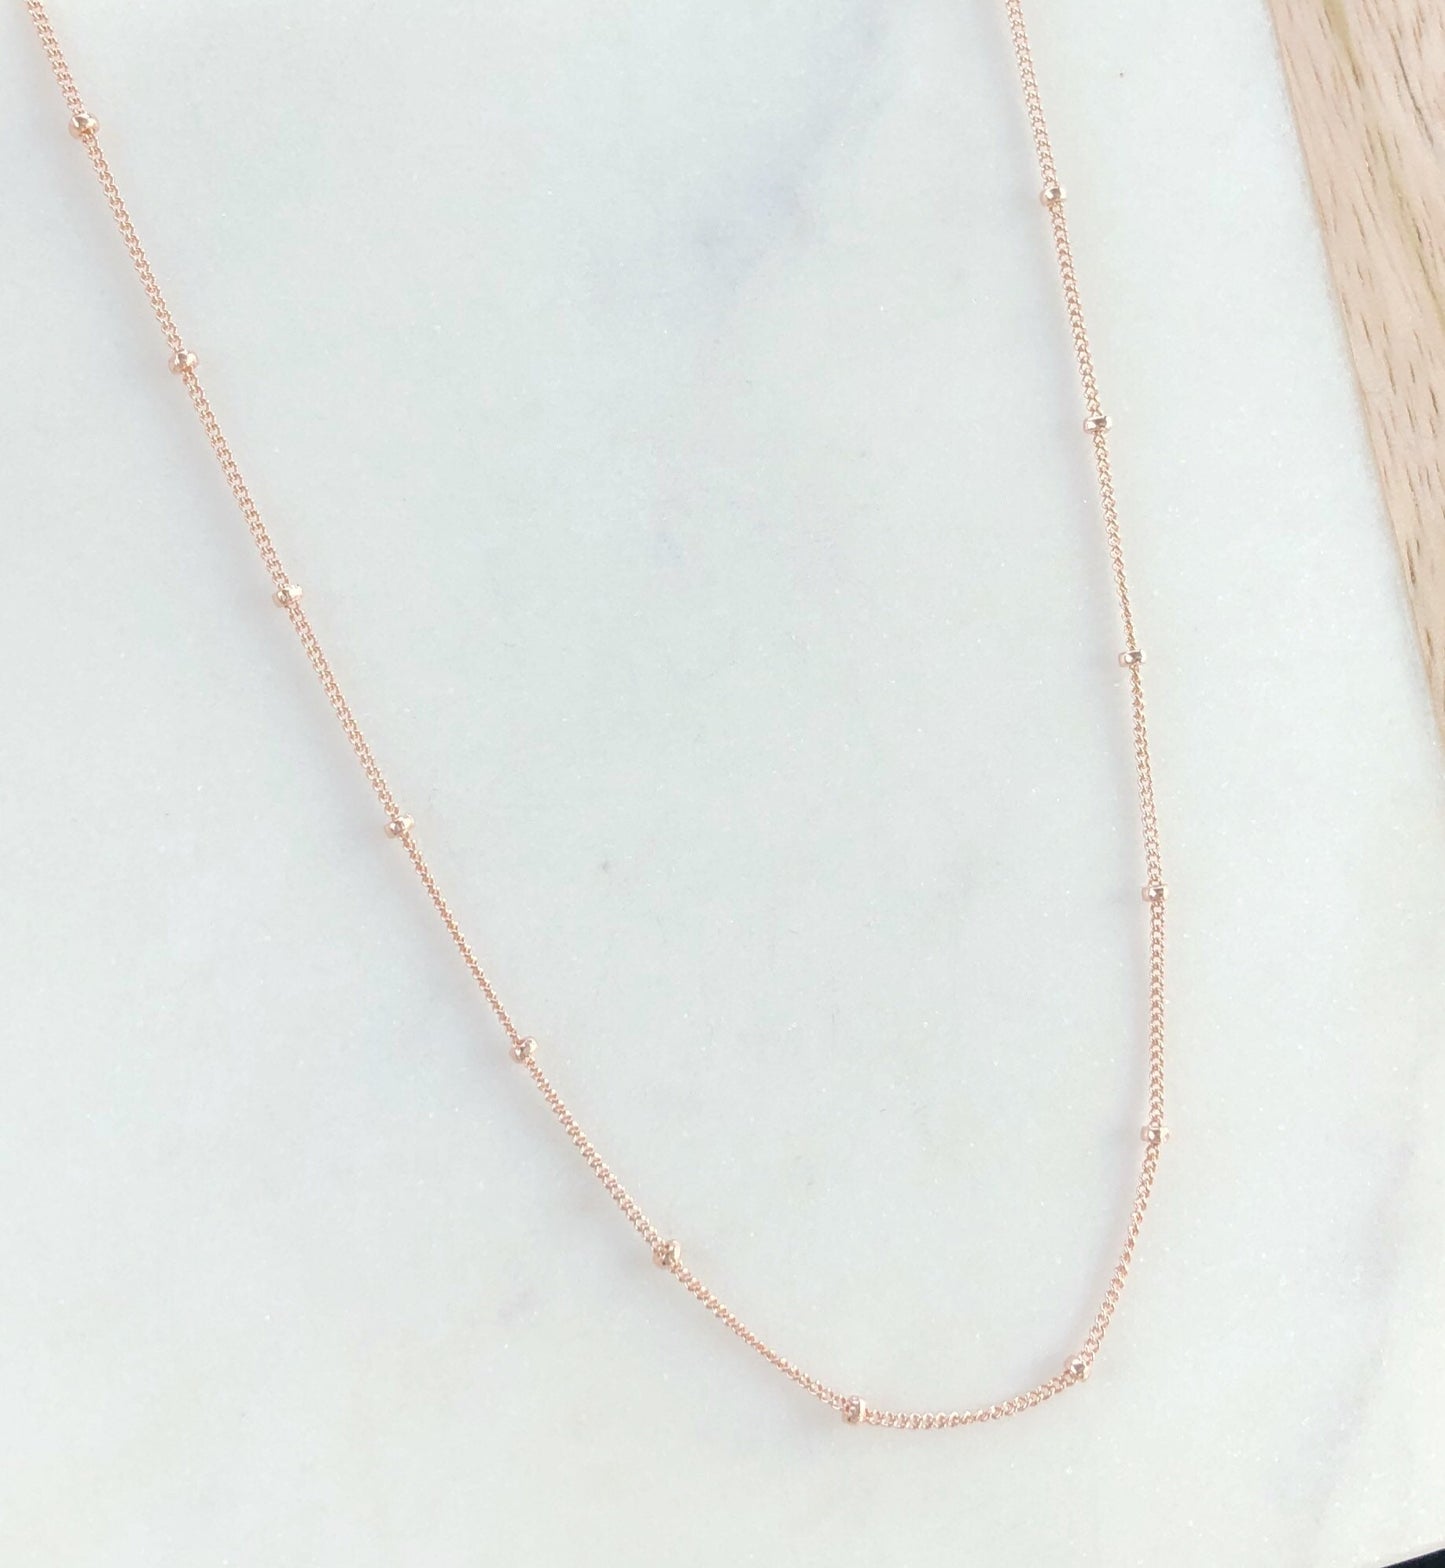 Simple Necklace, dainty necklace, layering necklace, chain necklace, gold Filled necklace, everyday necklace, gold necklace, jewelry, gift